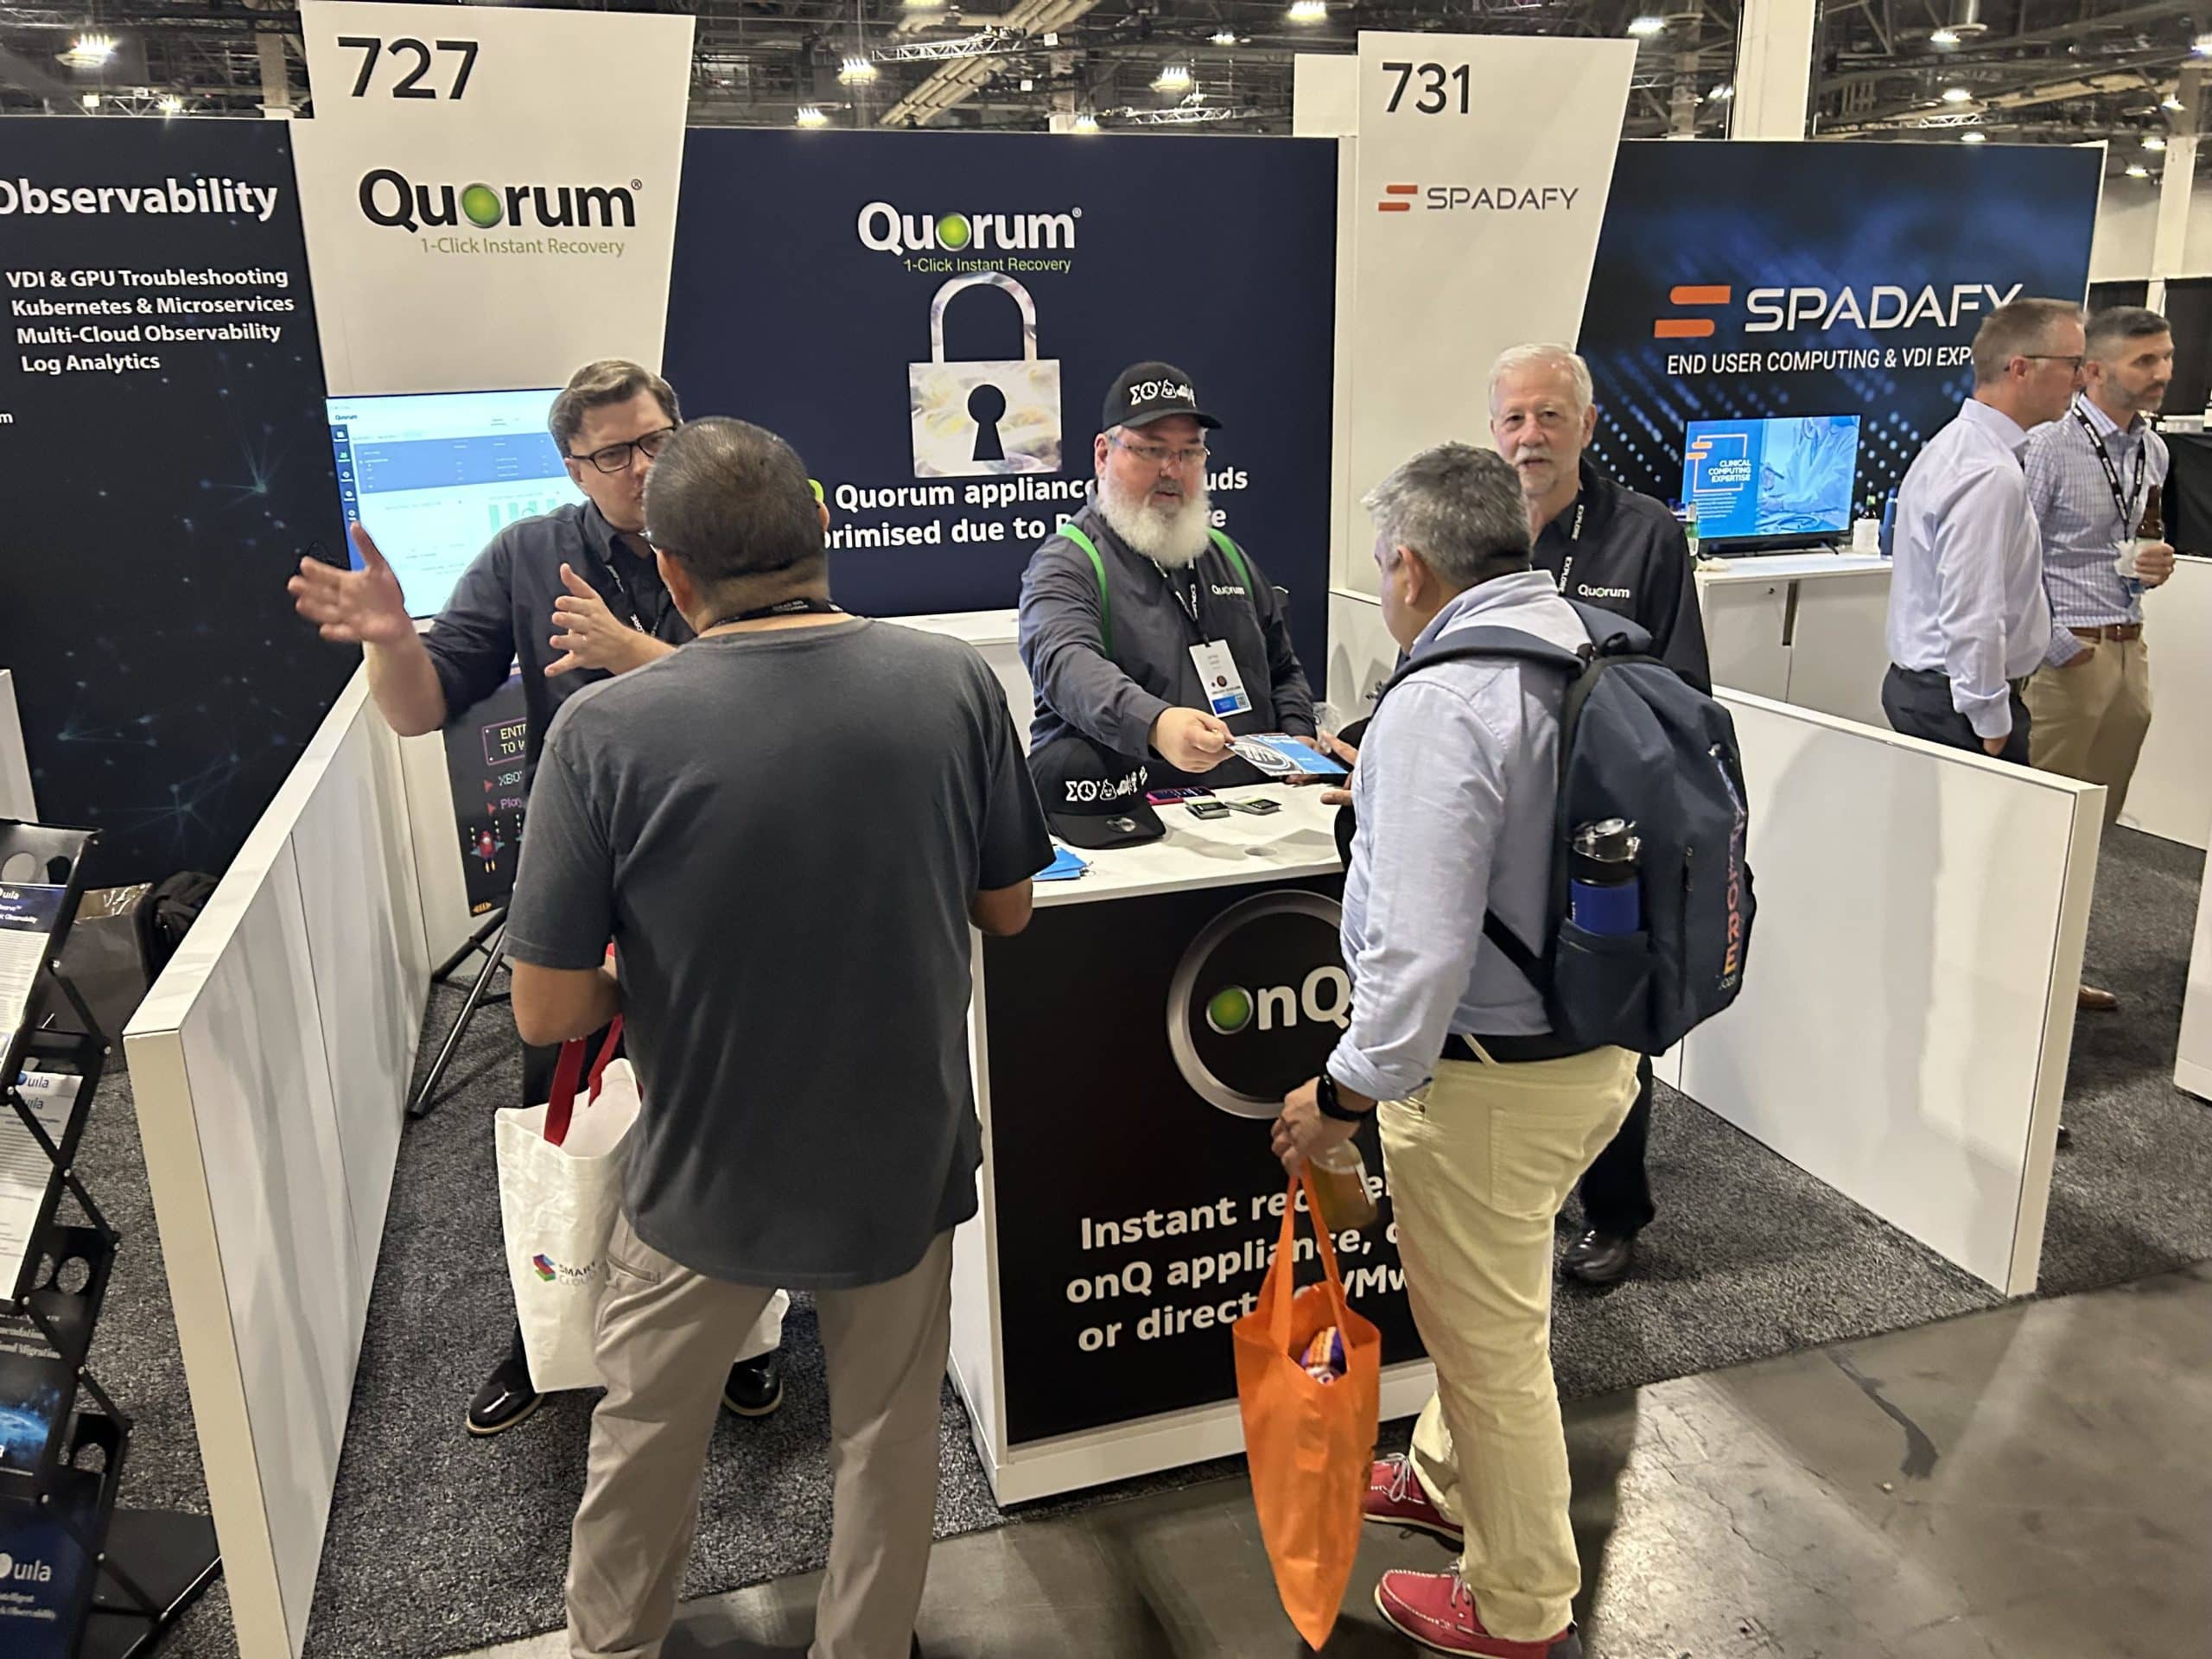 A group of people are interacting at a tradeshow booth for Quorum, a company providing IT disaster recovery solutions. The booth has monitors and promotional materials. Nearby, there are other booths labeled "727" and "731" showcasing different tech companies.